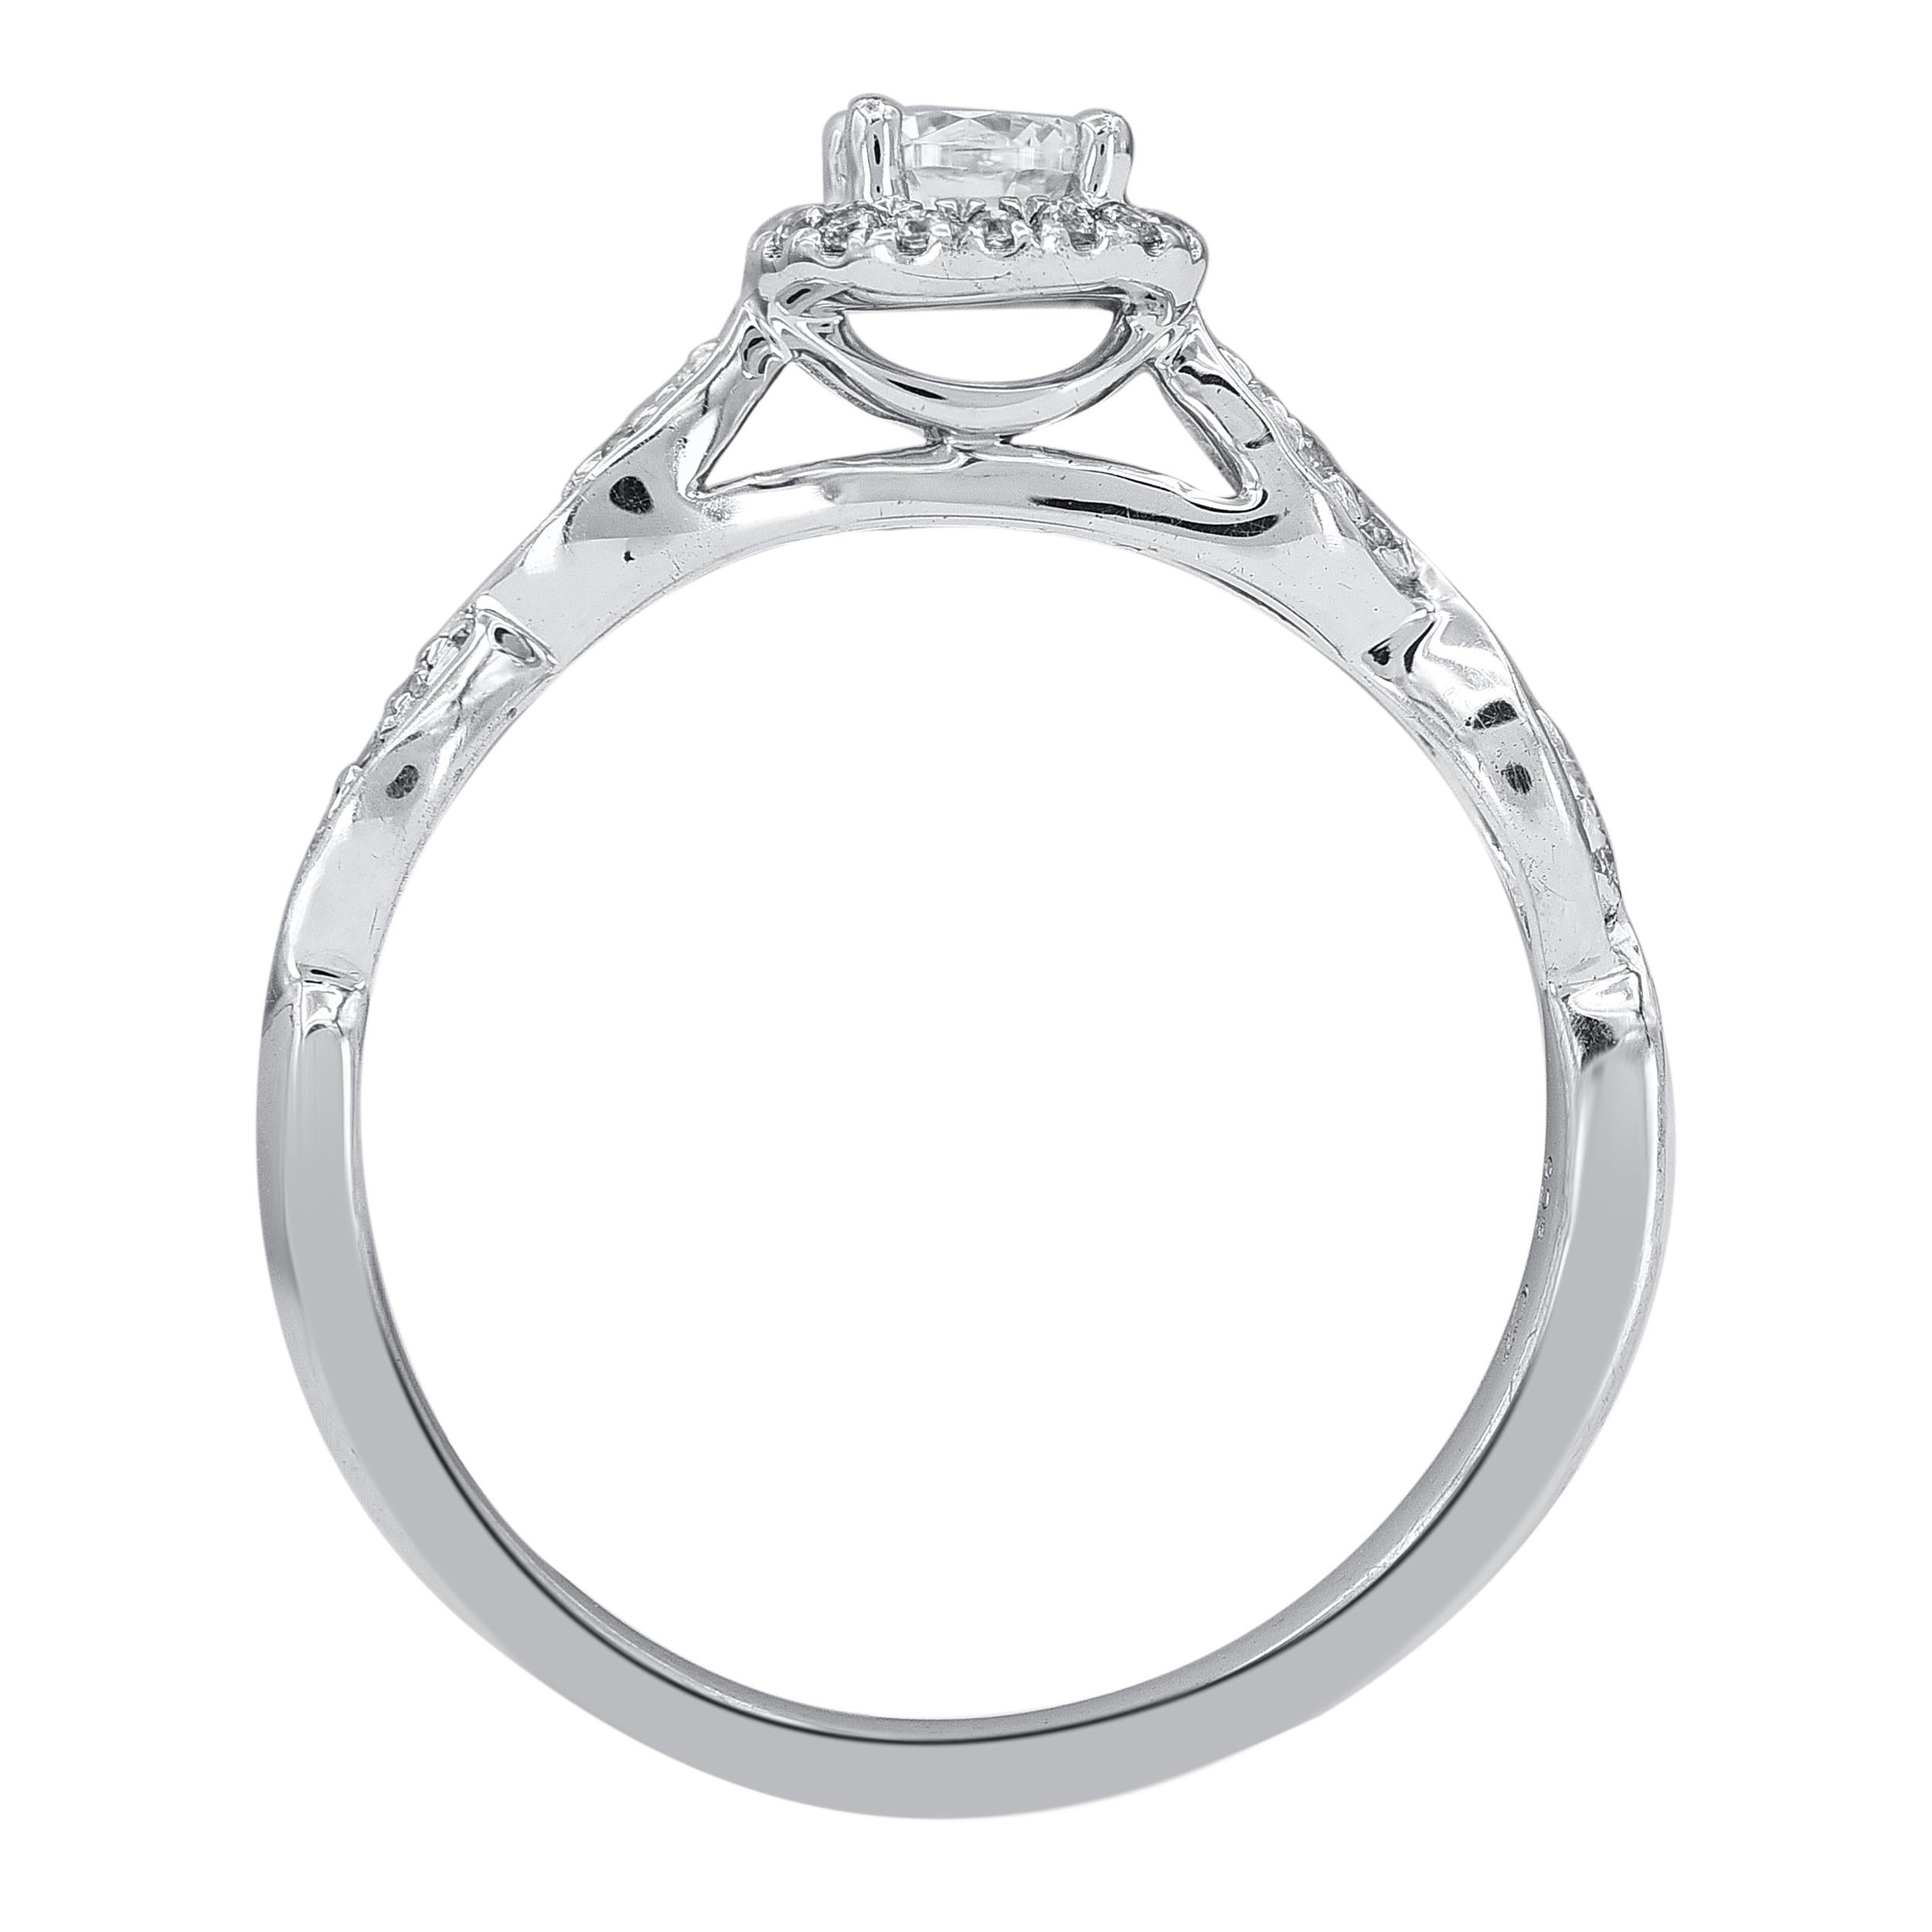 Classic and Contemporary, this diamond ring will enhance her jewelry collection. This beautiful ring features shimmering brilliant cut diamonds and single cut diamonds in prong and pave setting. crafted in 14 karat white gold. The ring is studded